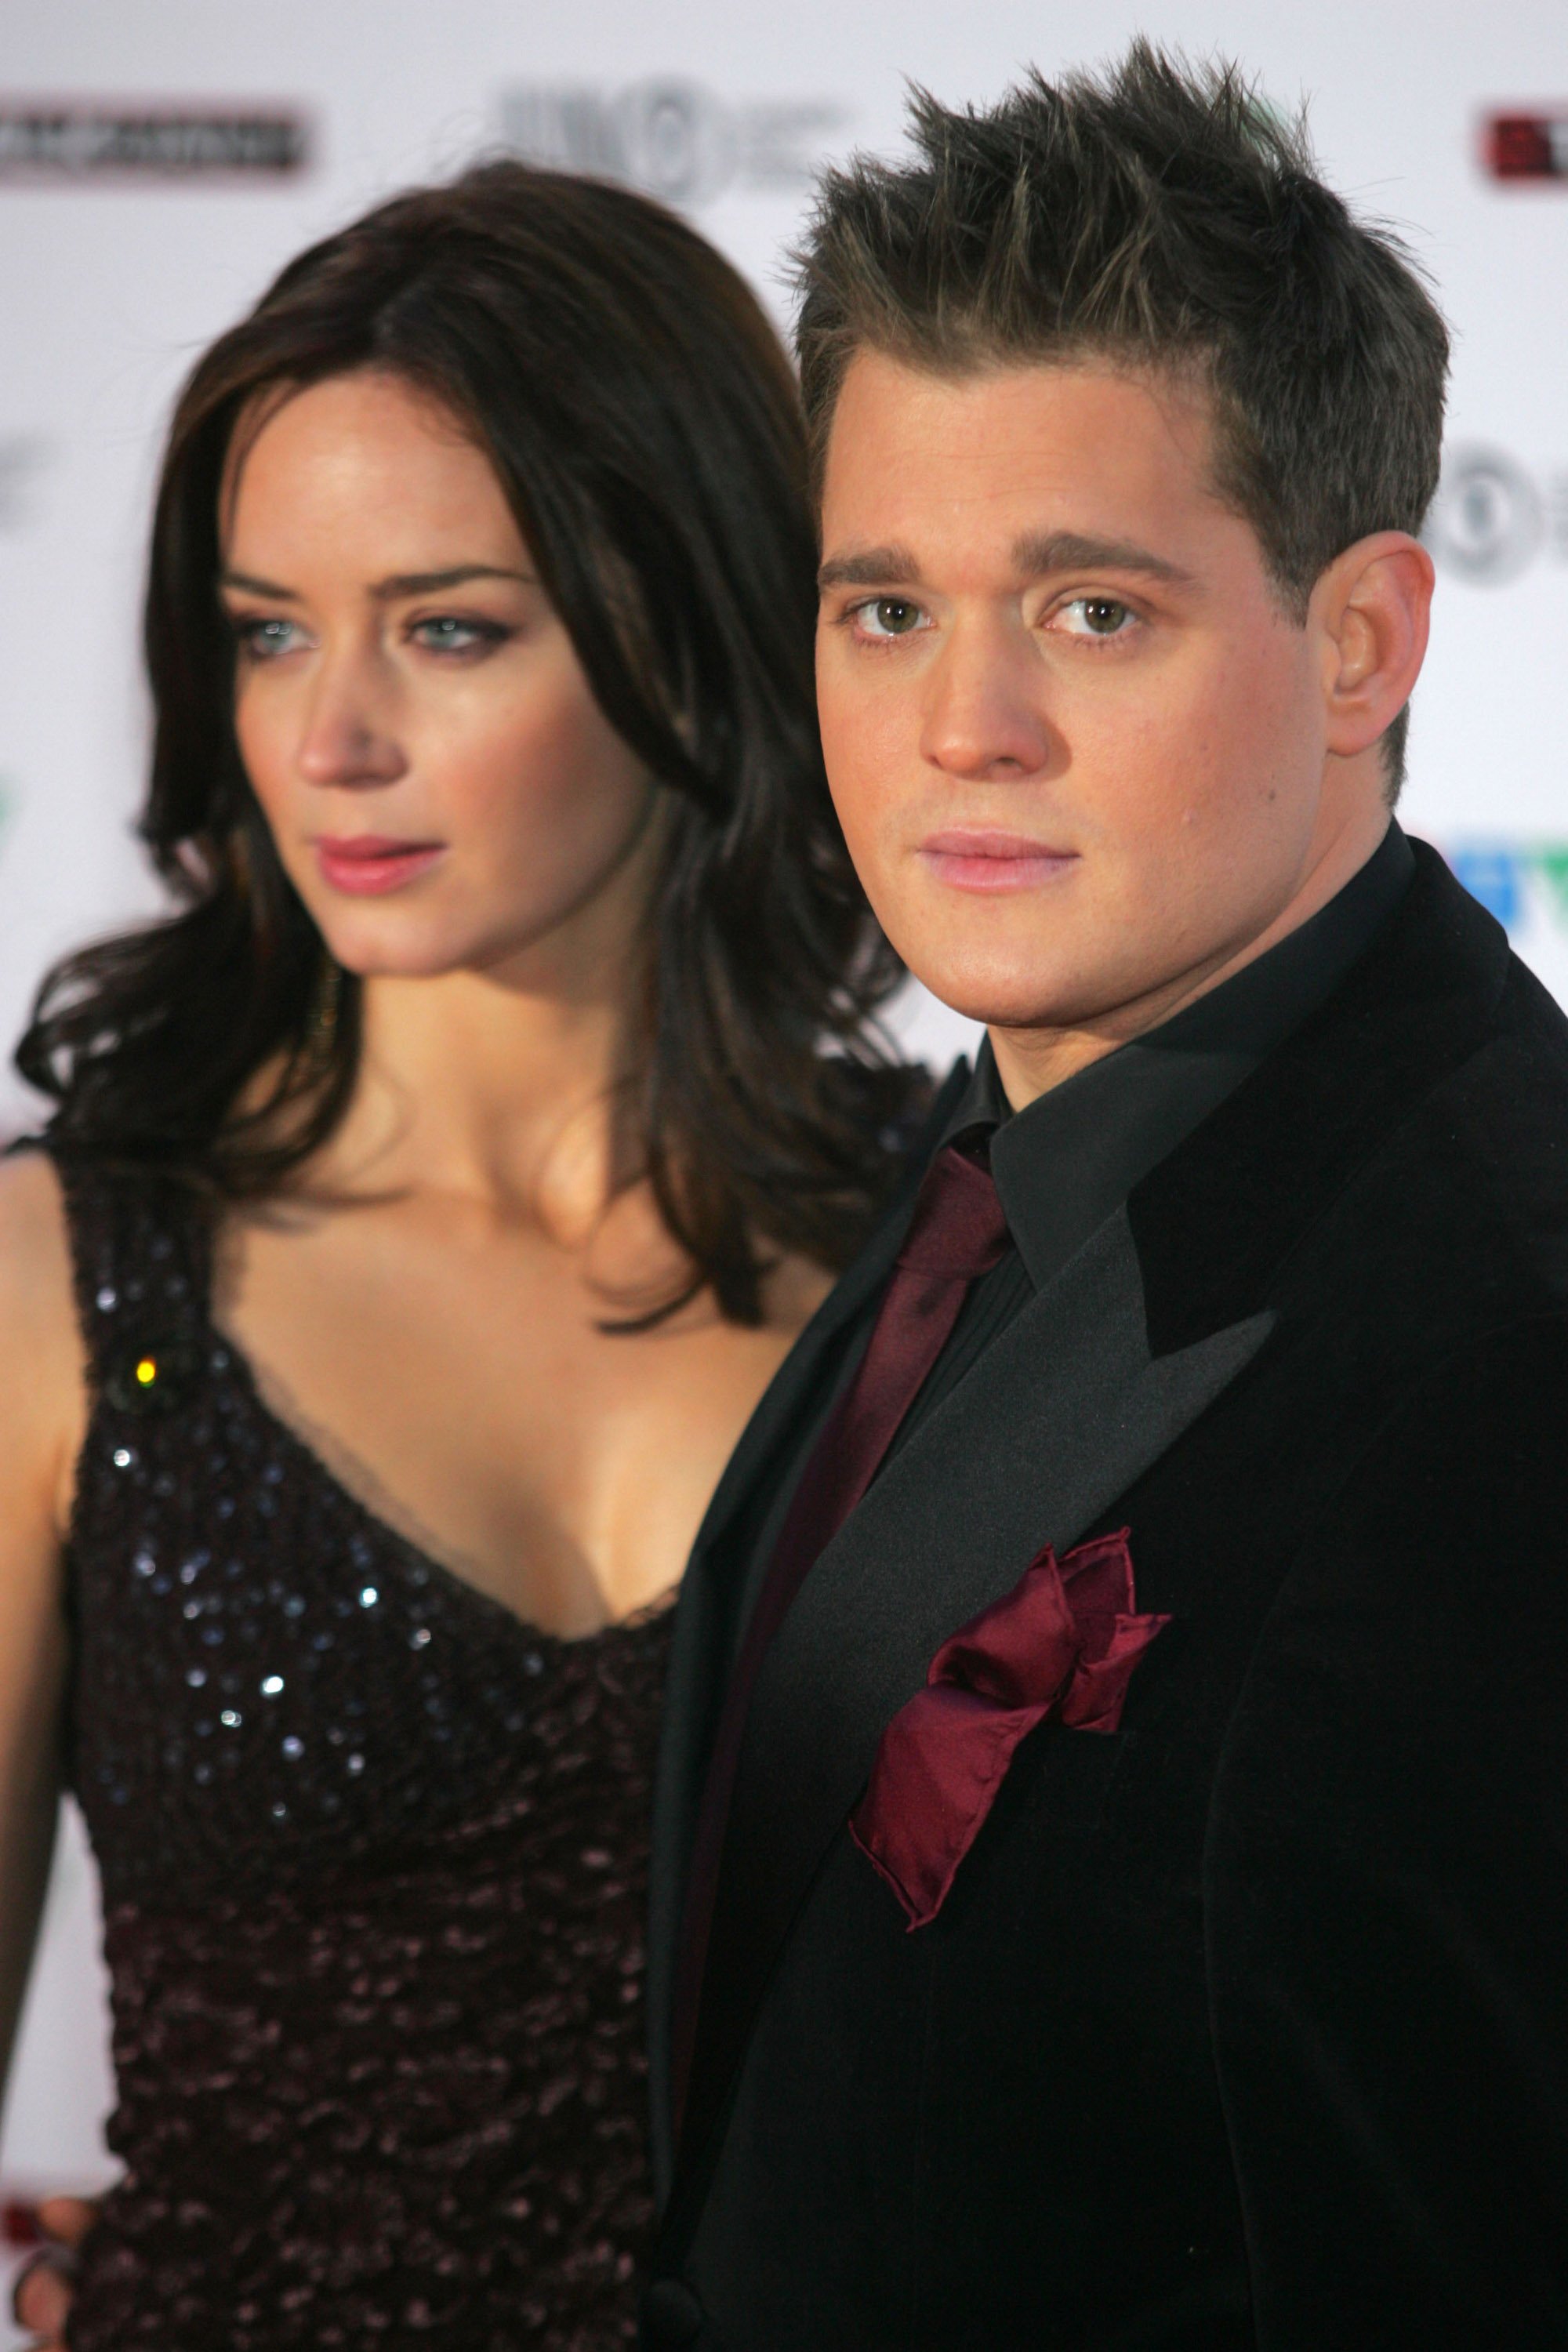 Emily Blunt and Michael Bublé at the JUNO Awards Red Carpet on April 2, 2006. | Source: George Pimentel/WireImage/Getty Images